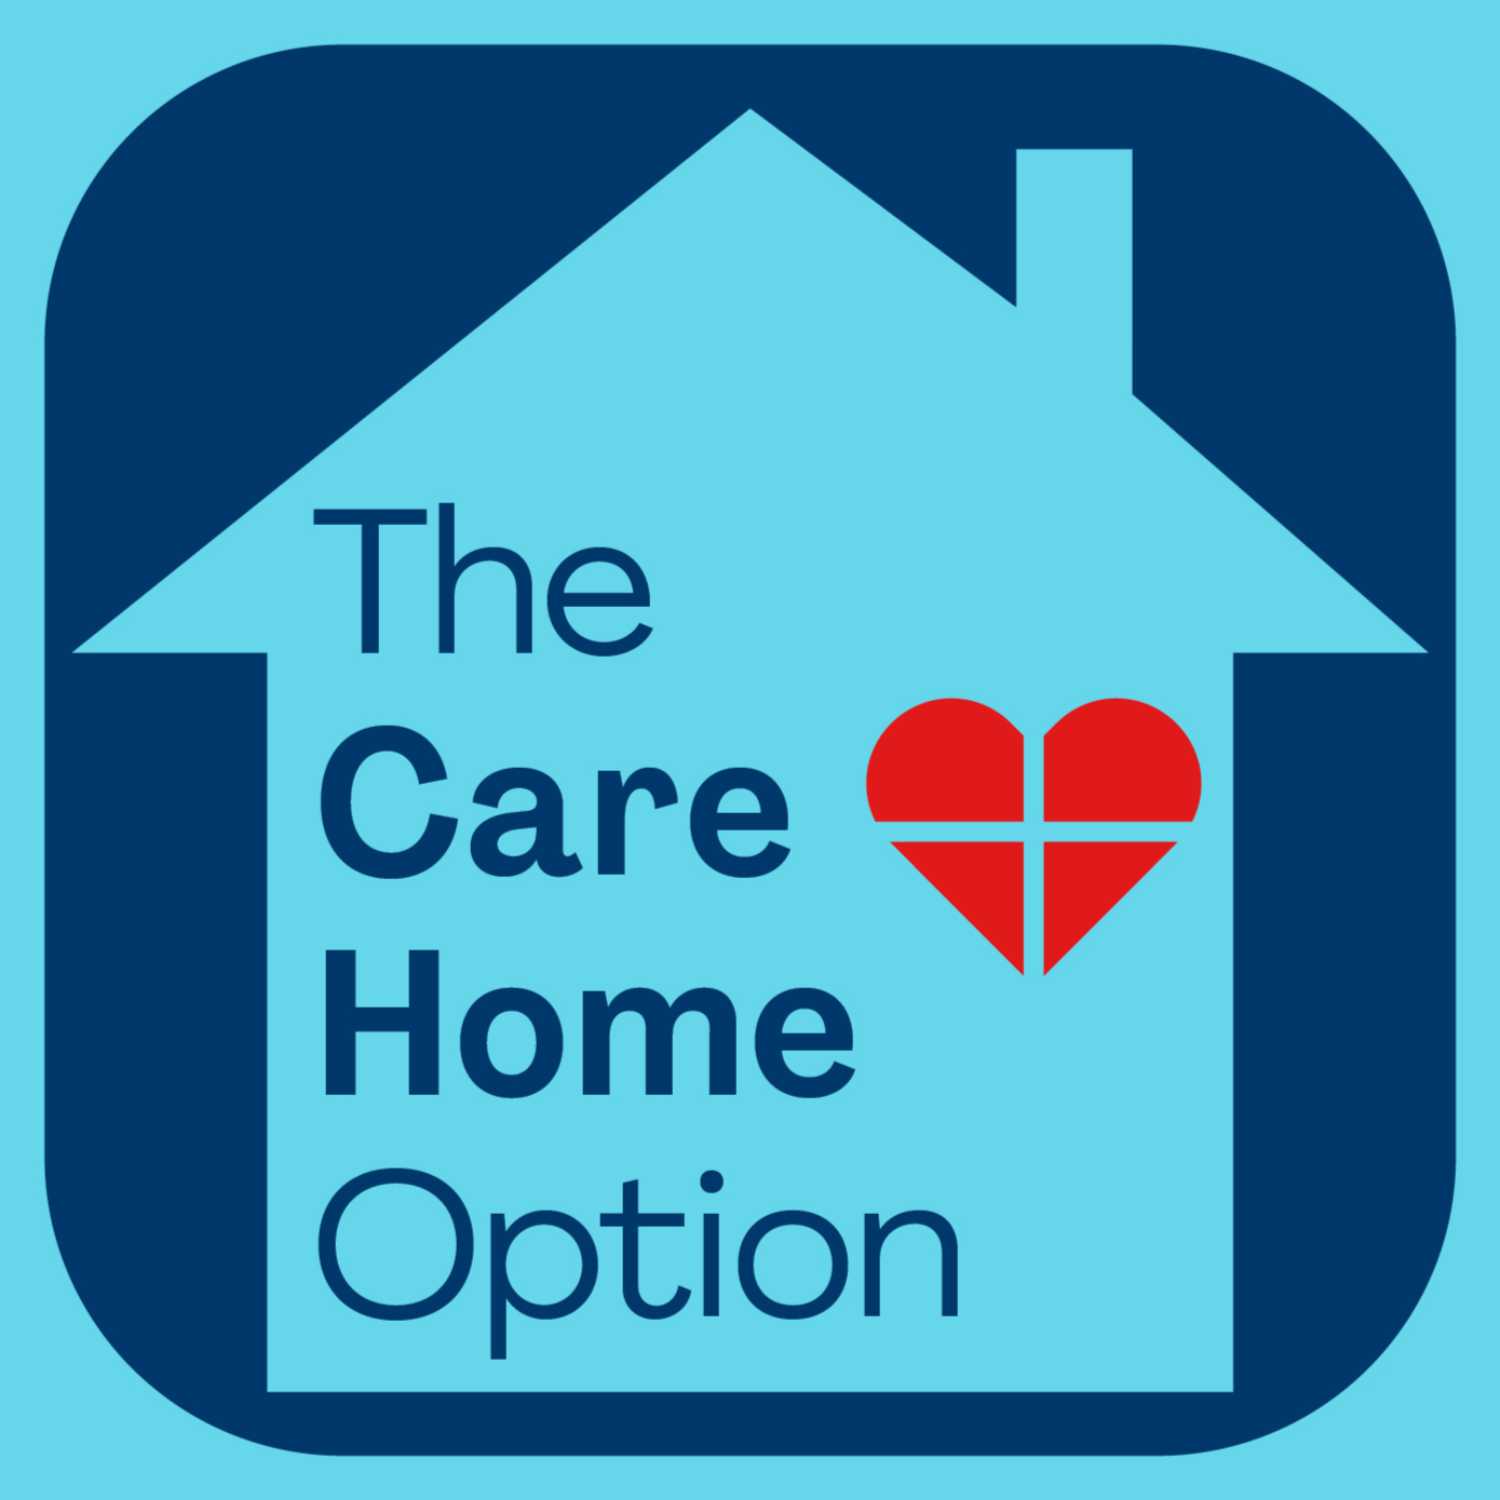 The Care Home Option